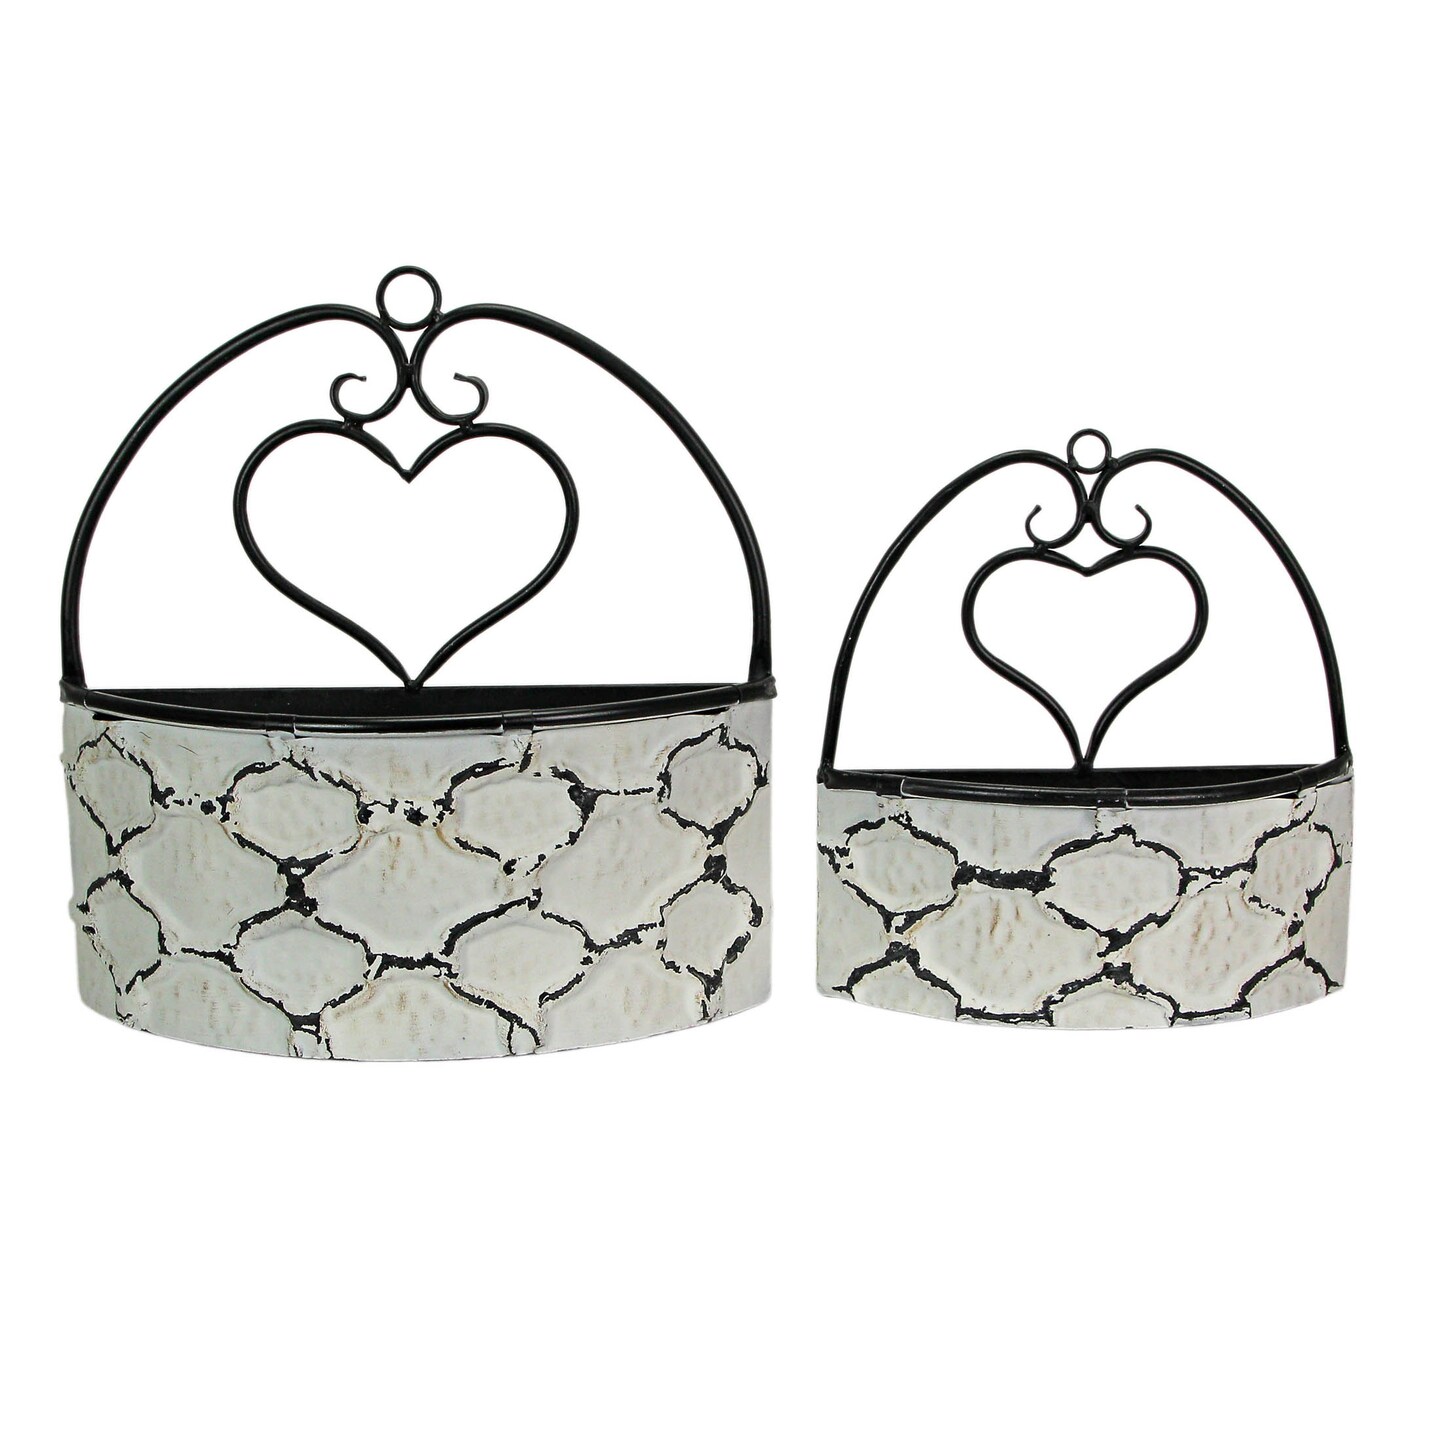 Large &#x26; Small Galvanized Metal Rustic White Wall Pocket Planters Heart Hanging Decor Set of 2